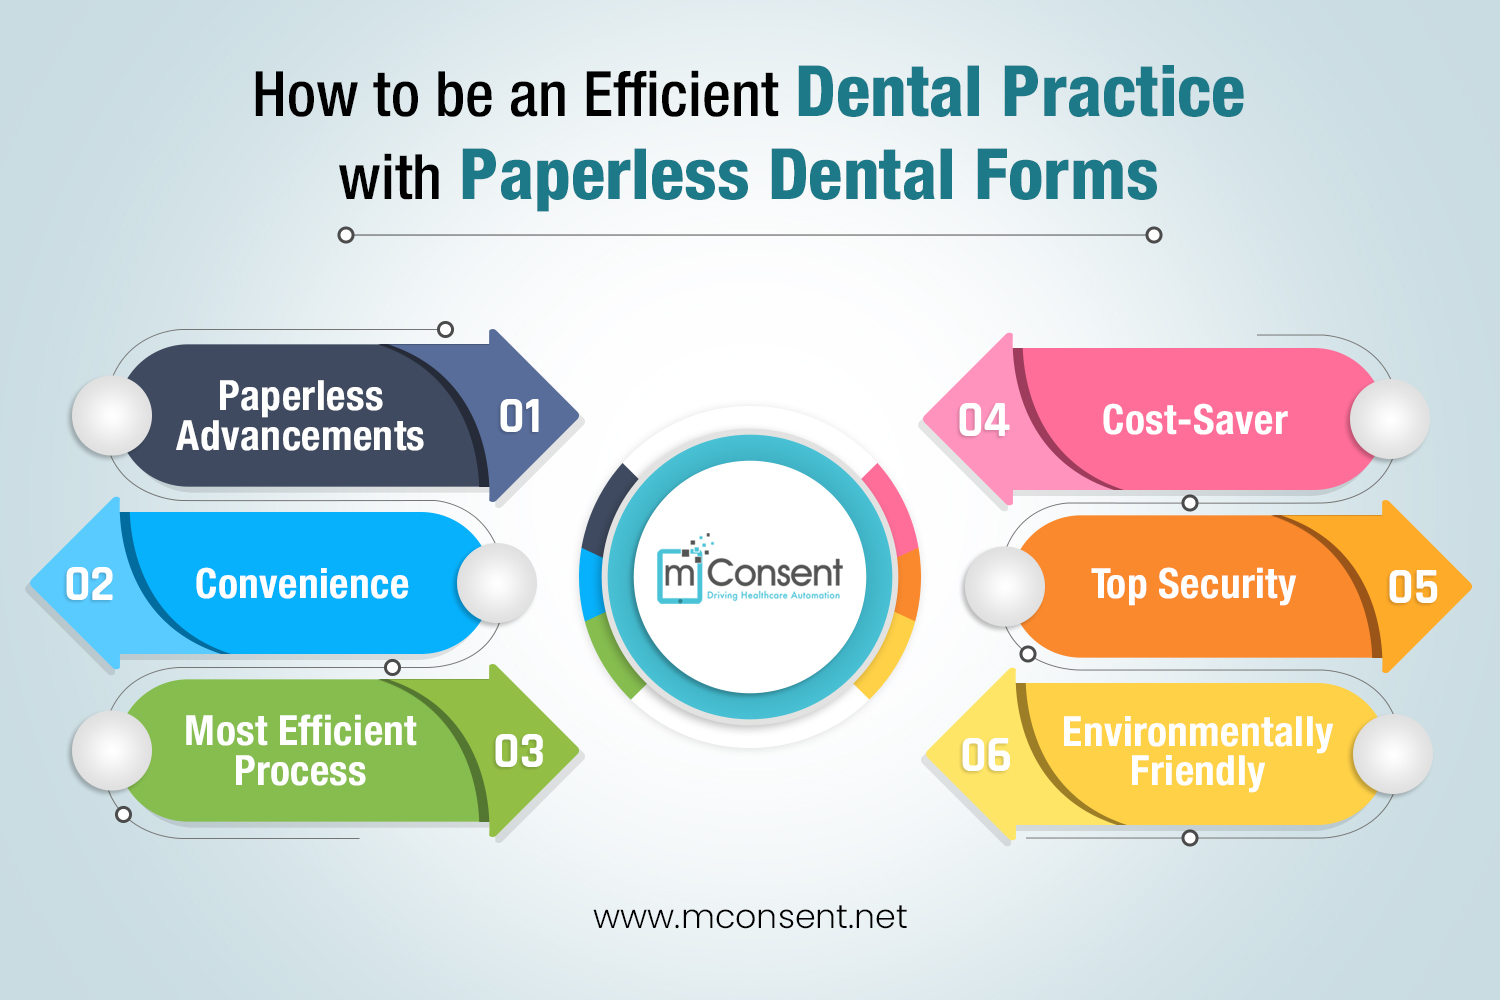 Dental practice with paperless dental forms